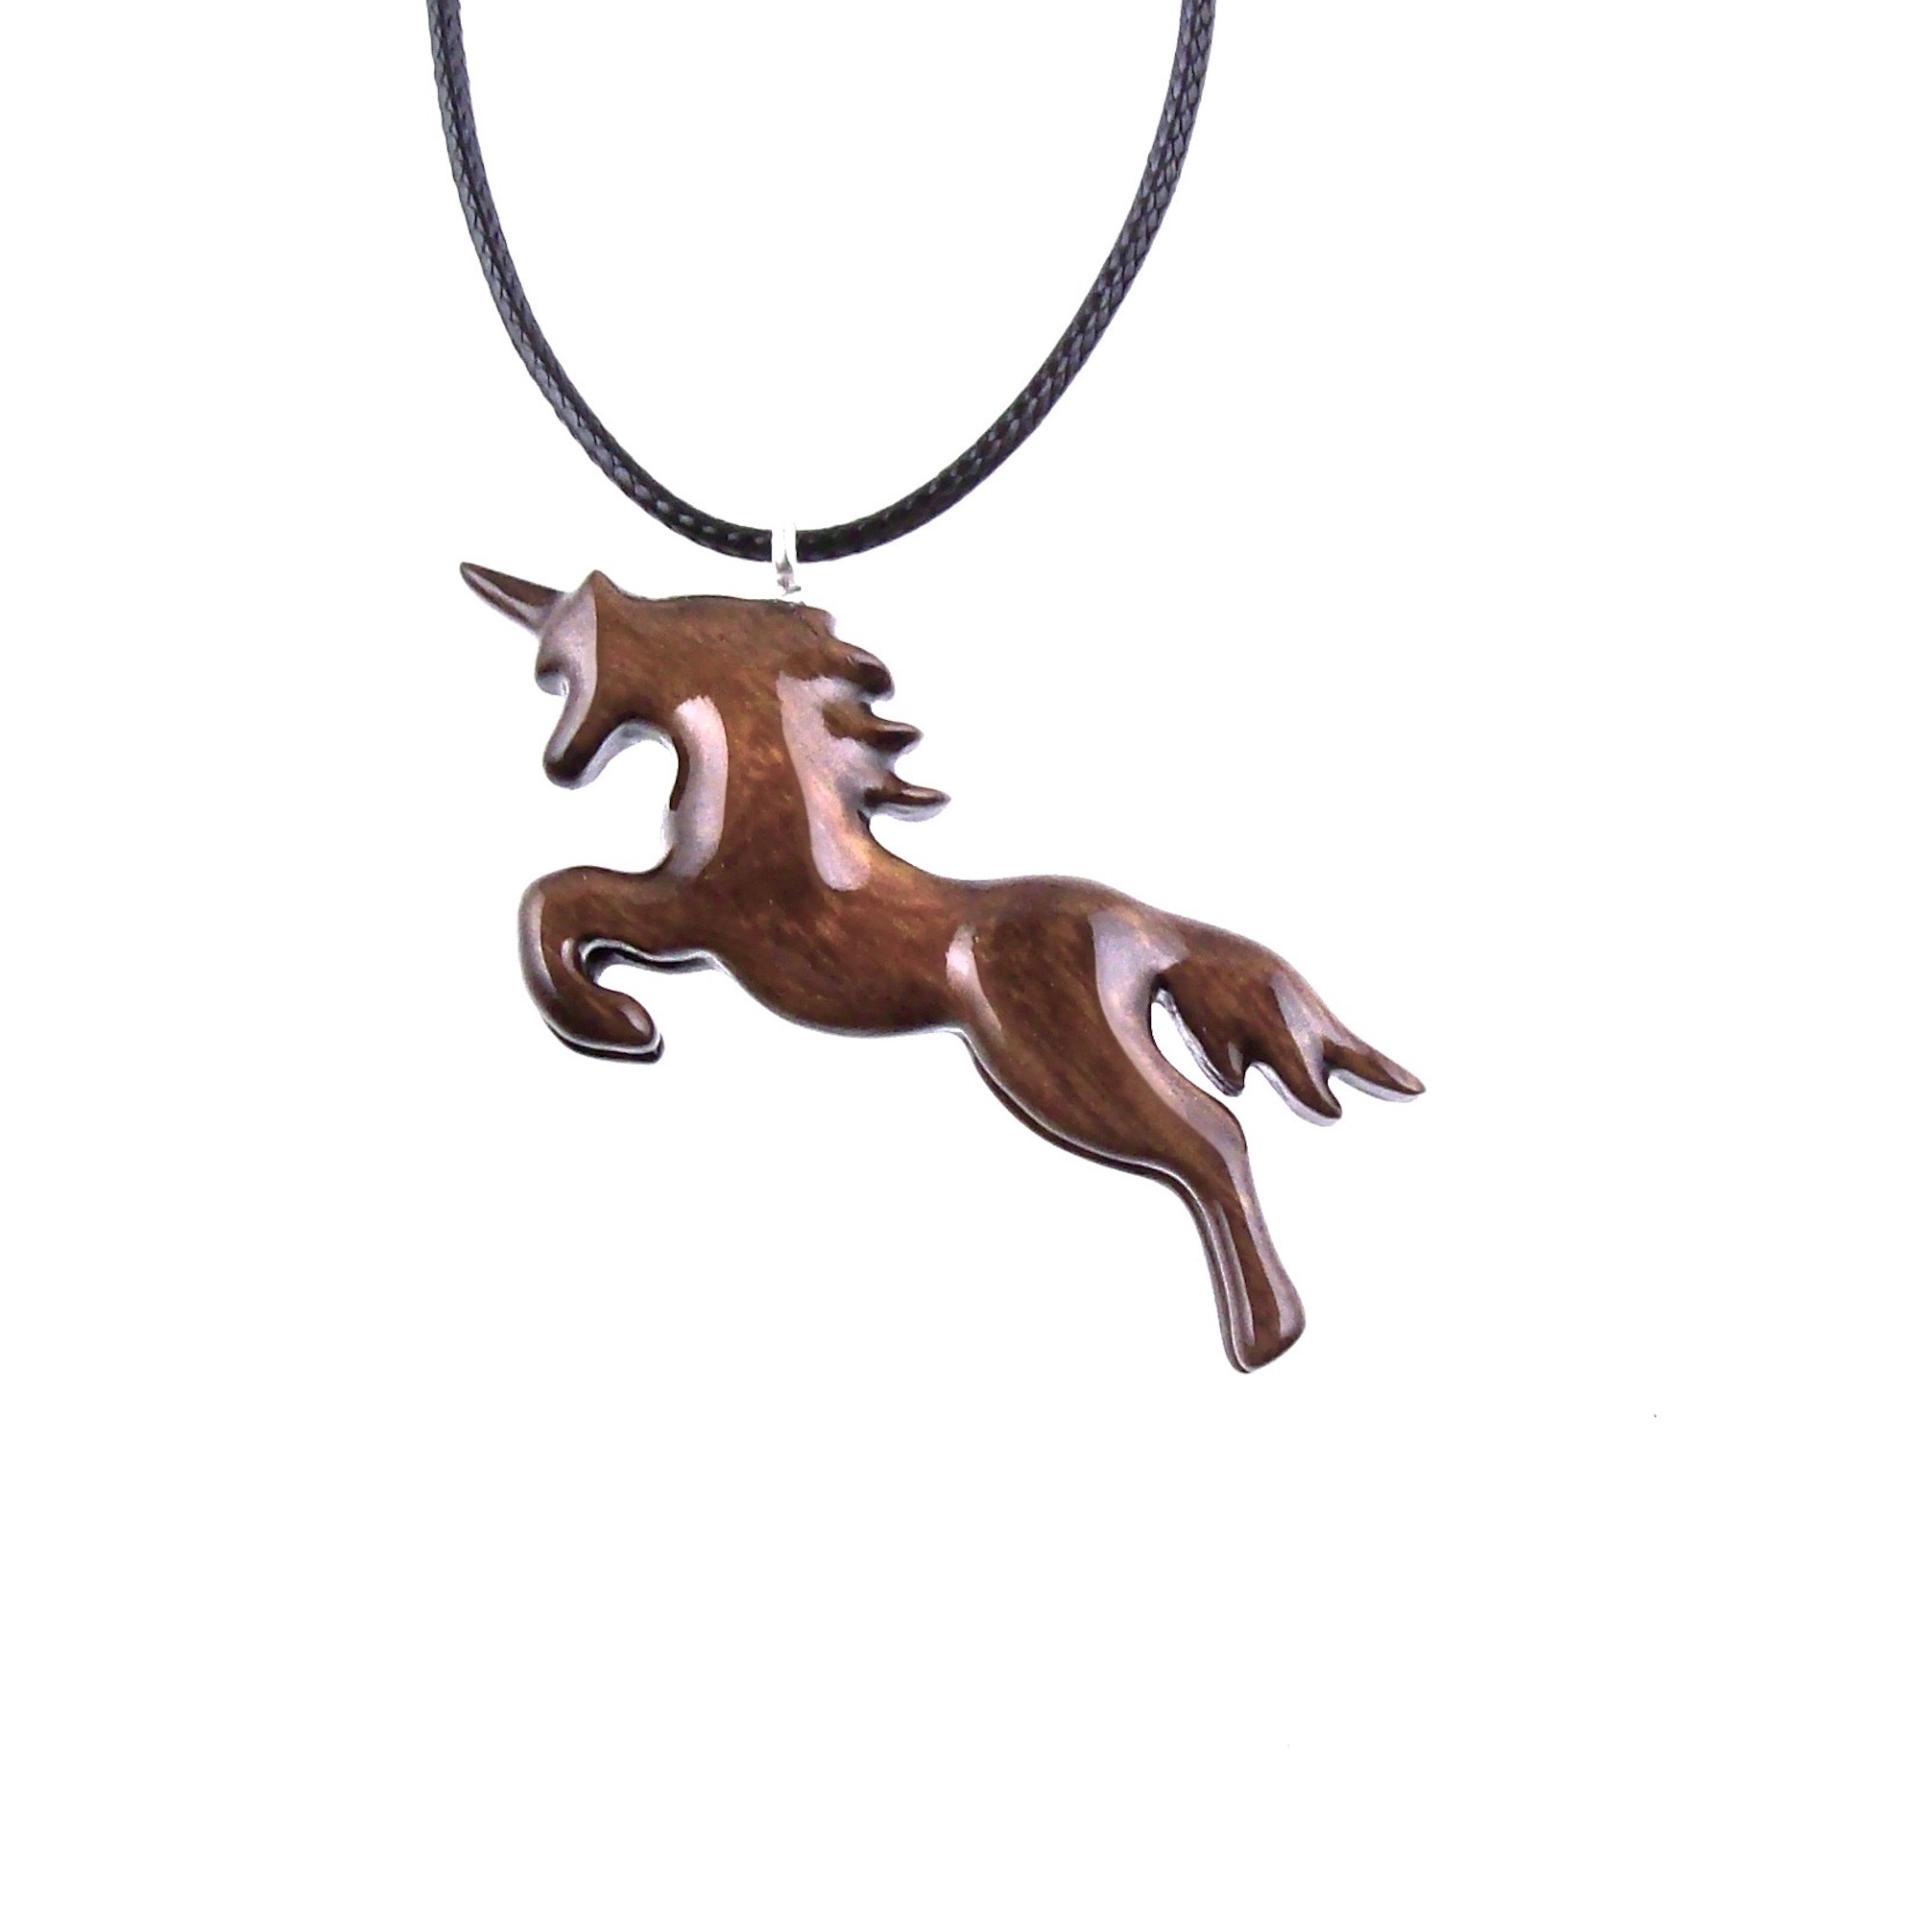 Unicorn Pendant, Hand Carved Wooden Unicorn Necklace, Fantasy Animal Necklace, Wood Jewelry, One of a Kind Gift